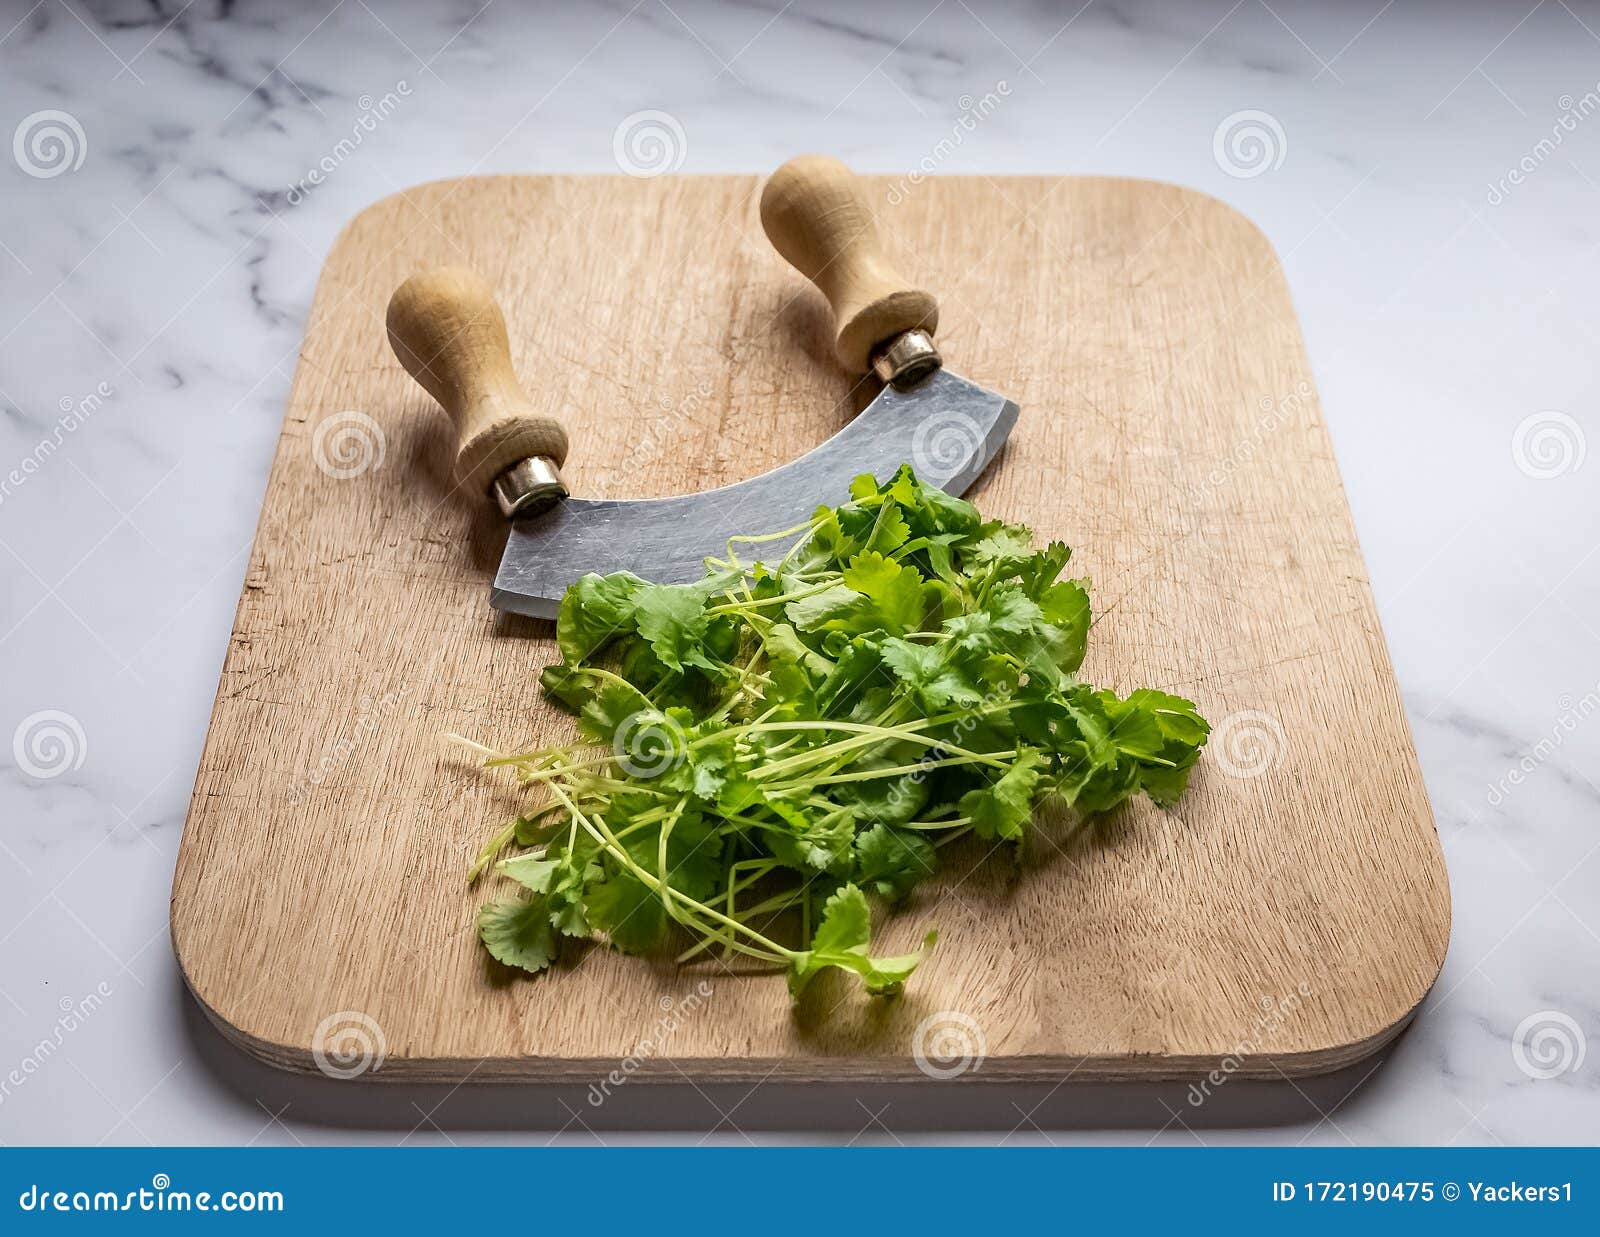 https://thumbs.dreamstime.com/z/coriander-leaves-herb-chopper-wooden-board-white-marbled-work-top-top-down-view-double-handed-herb-chopper-172190475.jpg